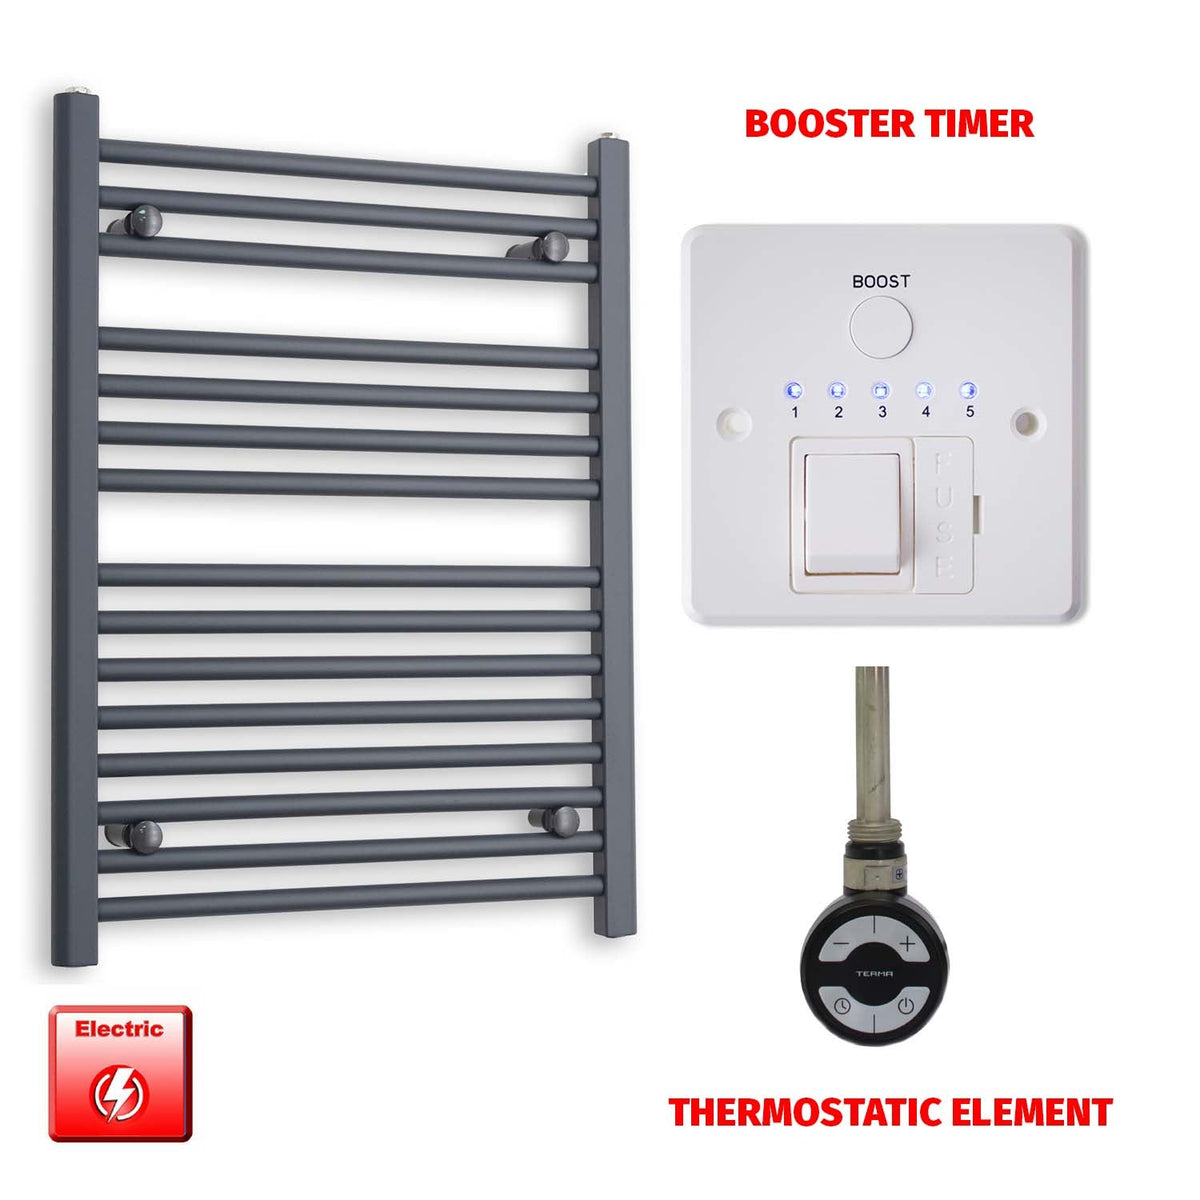 800mm High 600mm Wide Flat Anthracite Pre-Filled Electric Heated Towel Rail Radiator HTR MOA Thermostatic element Booster timer